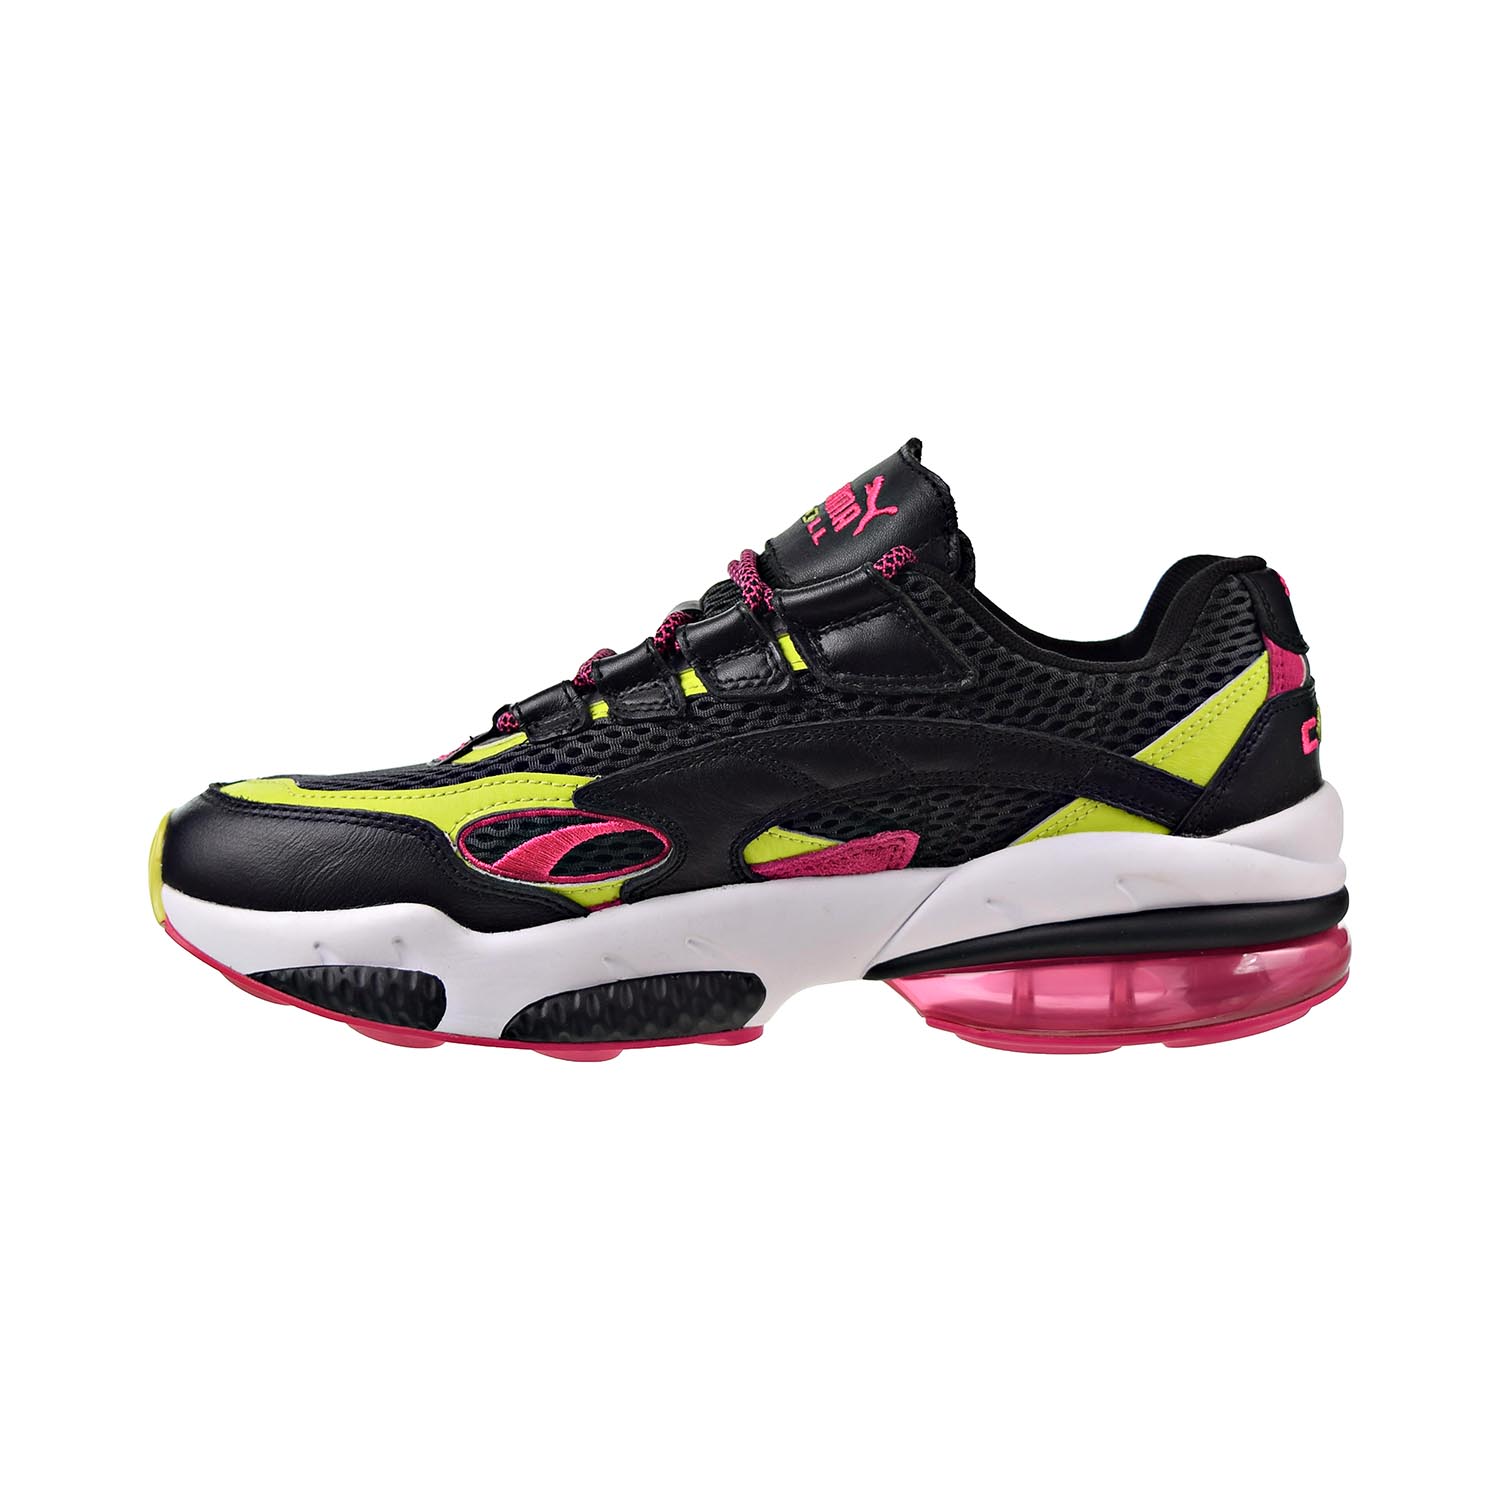 Puma Cell Venom 370417-01 Men Black/Pink/Lime Punch Athletic Running Shoes C1385 (10) - image 4 of 6